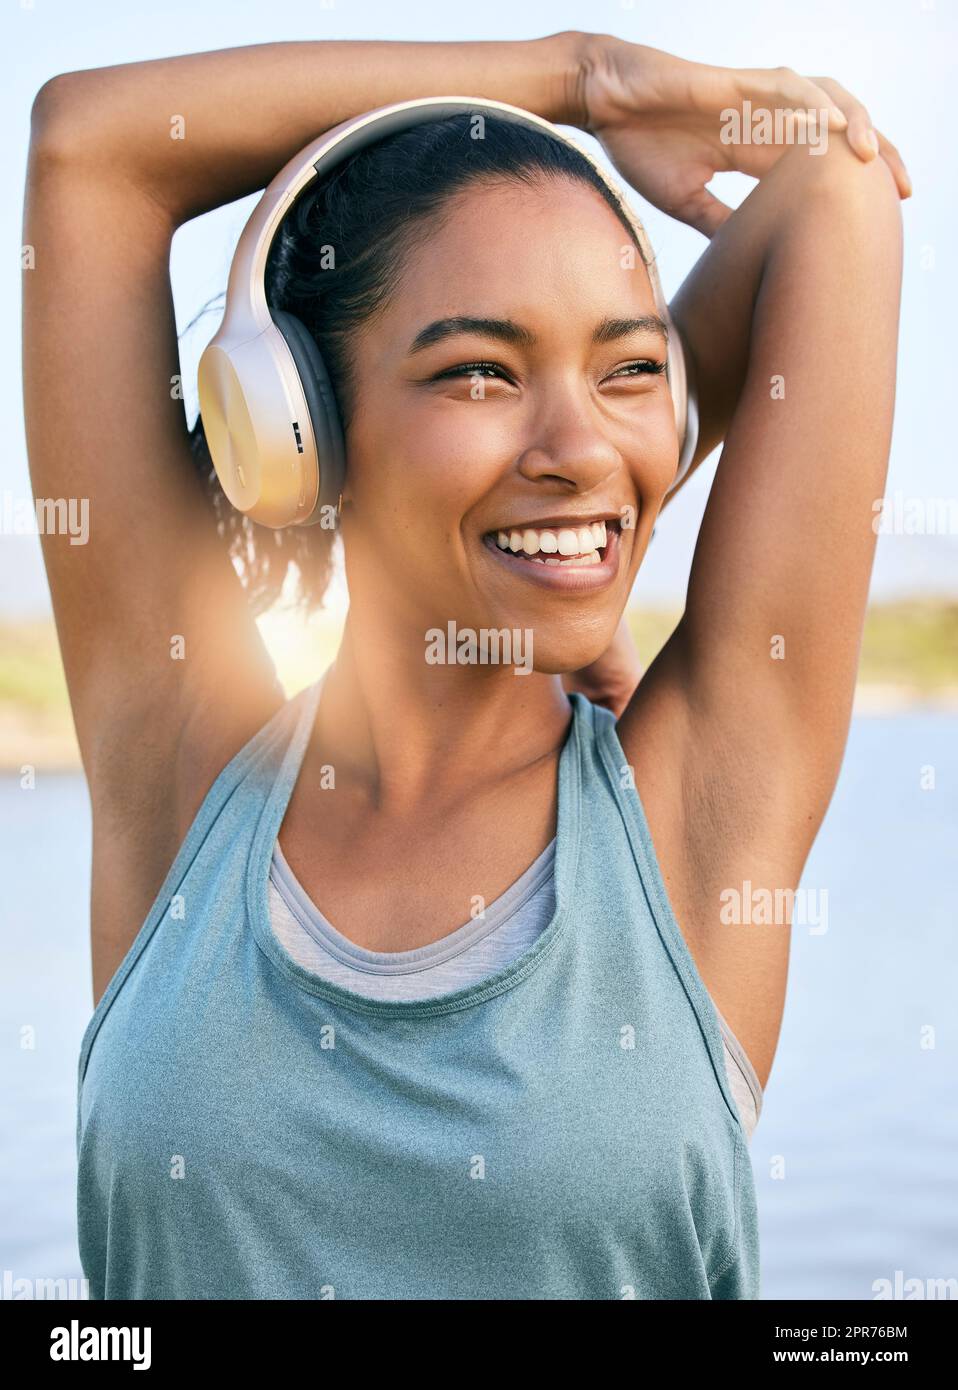 One active latina woman stretching arms and triceps by pulling elbow towards spine while exercising outdoors. Female athlete doing warm up to prepare body and muscles for training workout or run while listening to music on wireless headphones Stock Photo